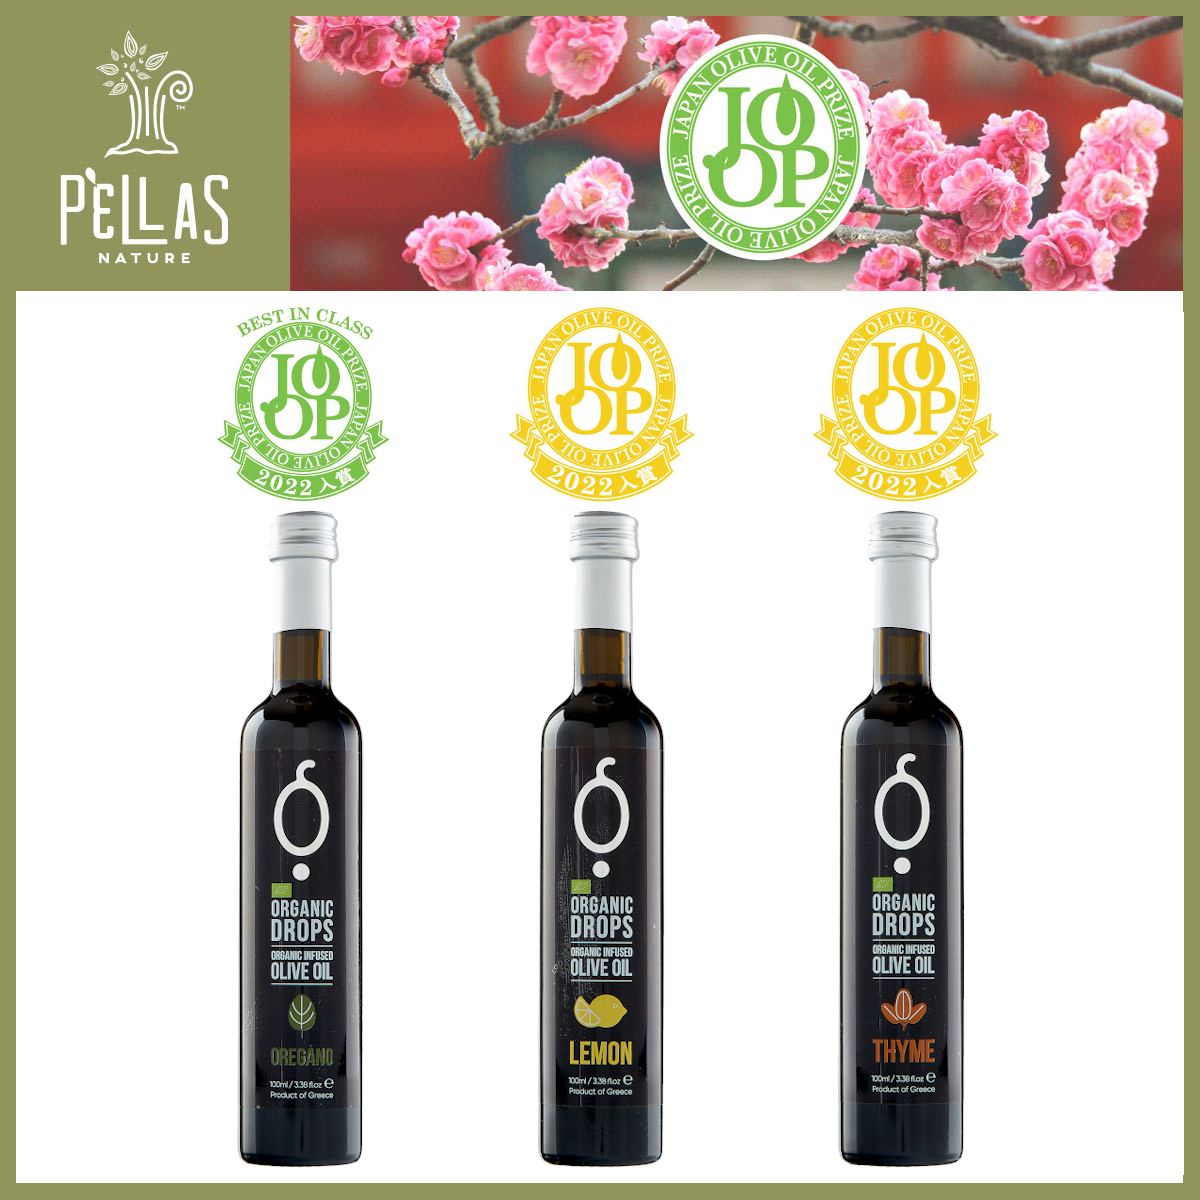 One Best in Class and Two Gold Prizes at the JOOP – Japan Olive Oil Prize 2022